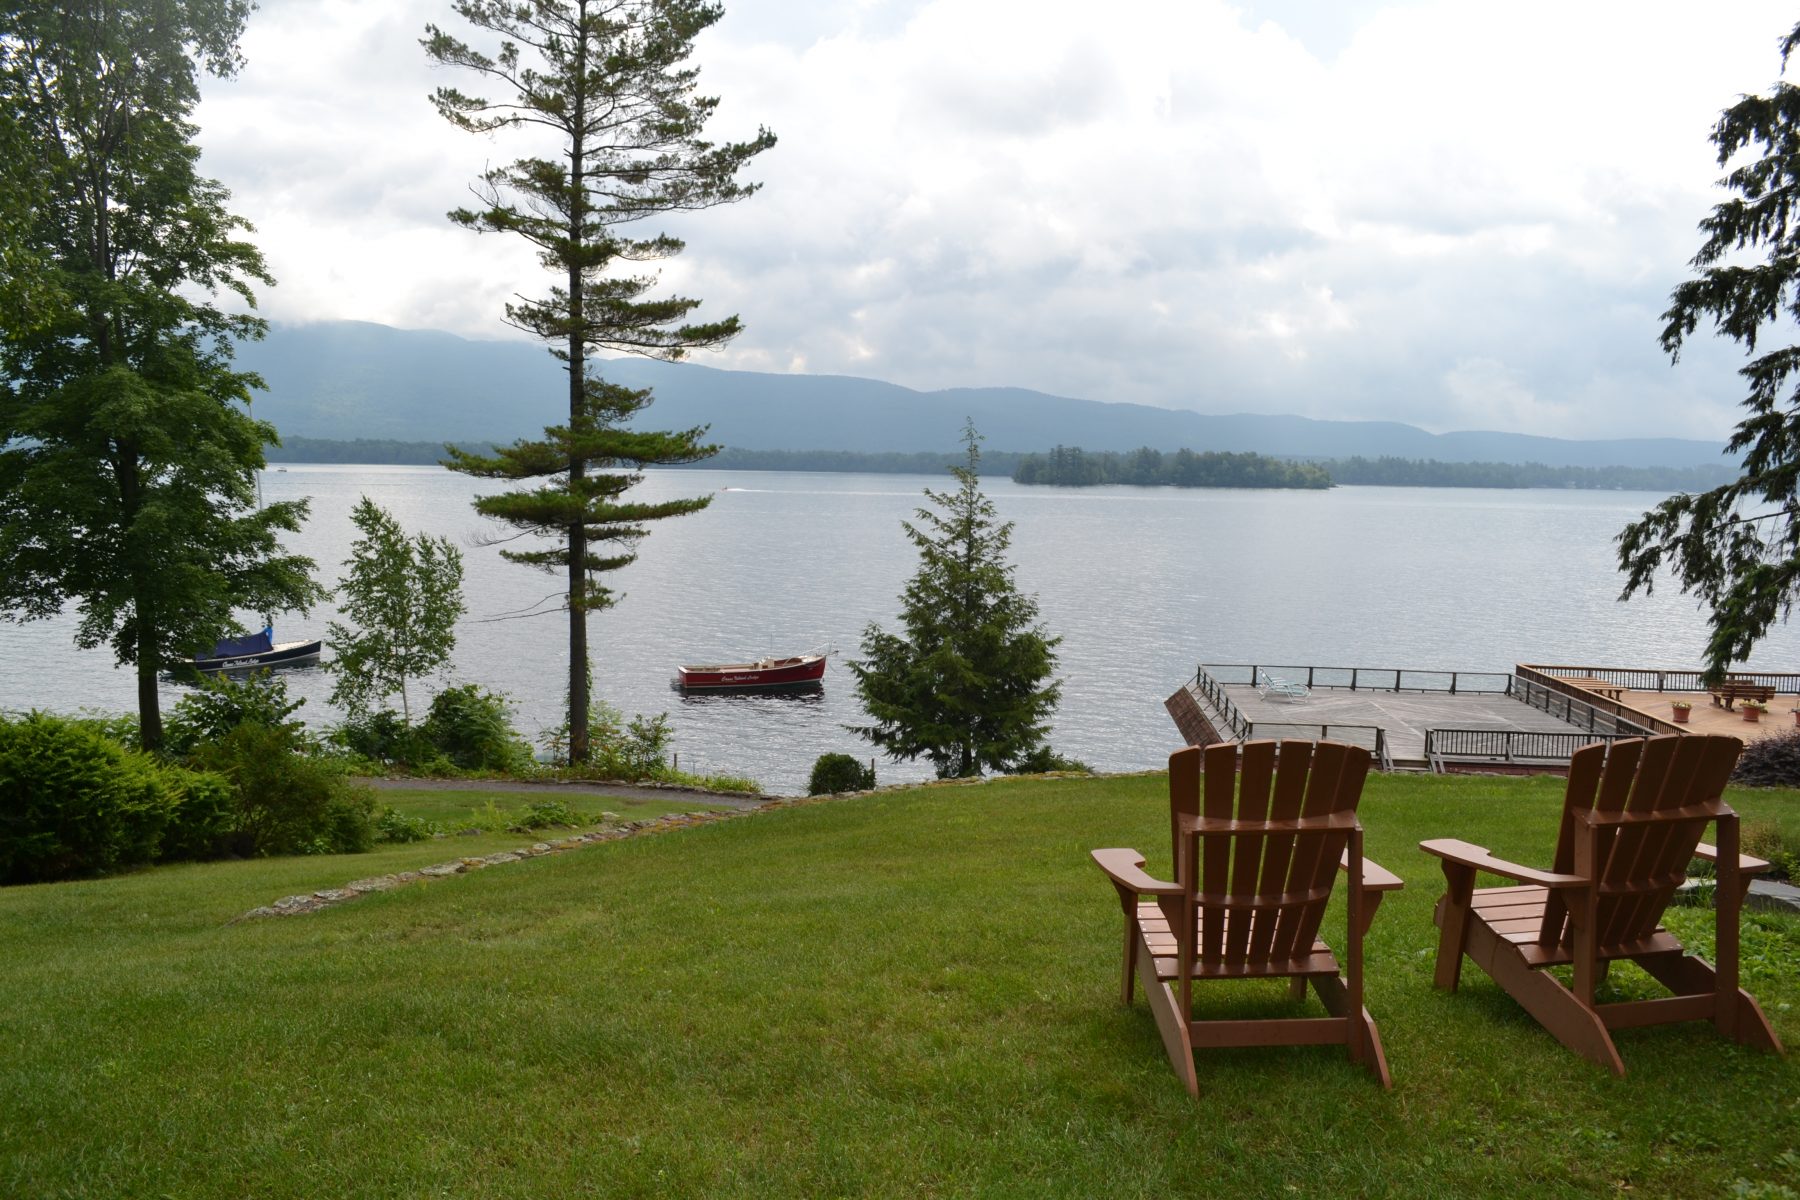 Adirondack chairs on grass looking out onto lake george